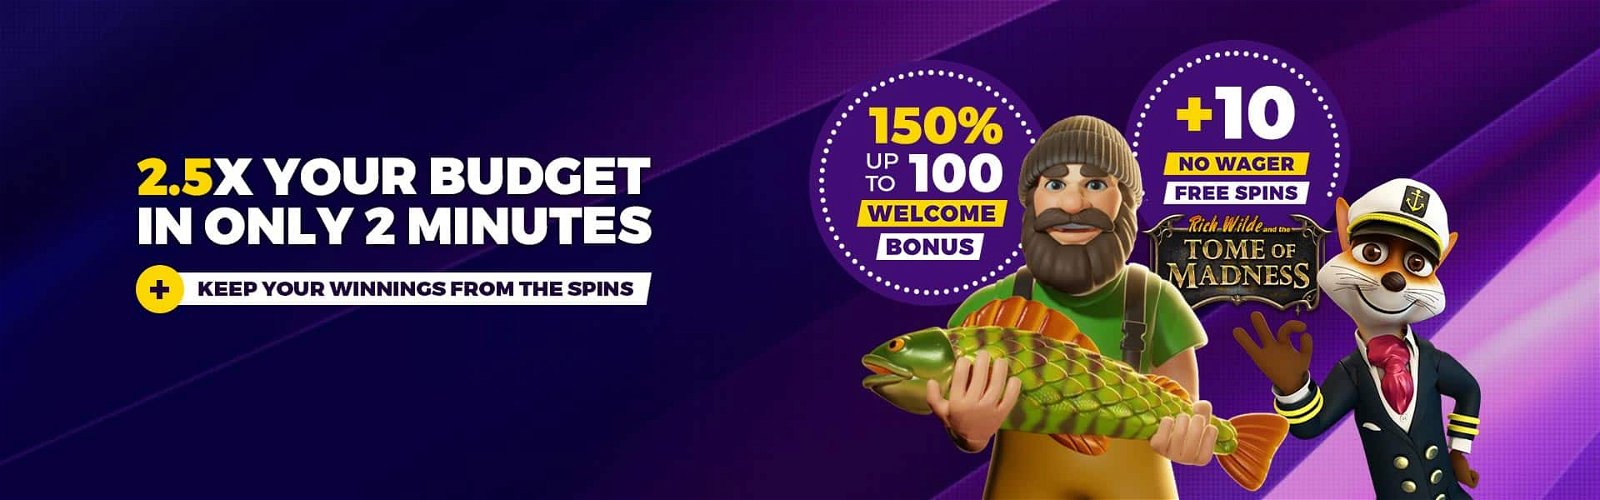 Casino | Welcome Offer | Slots